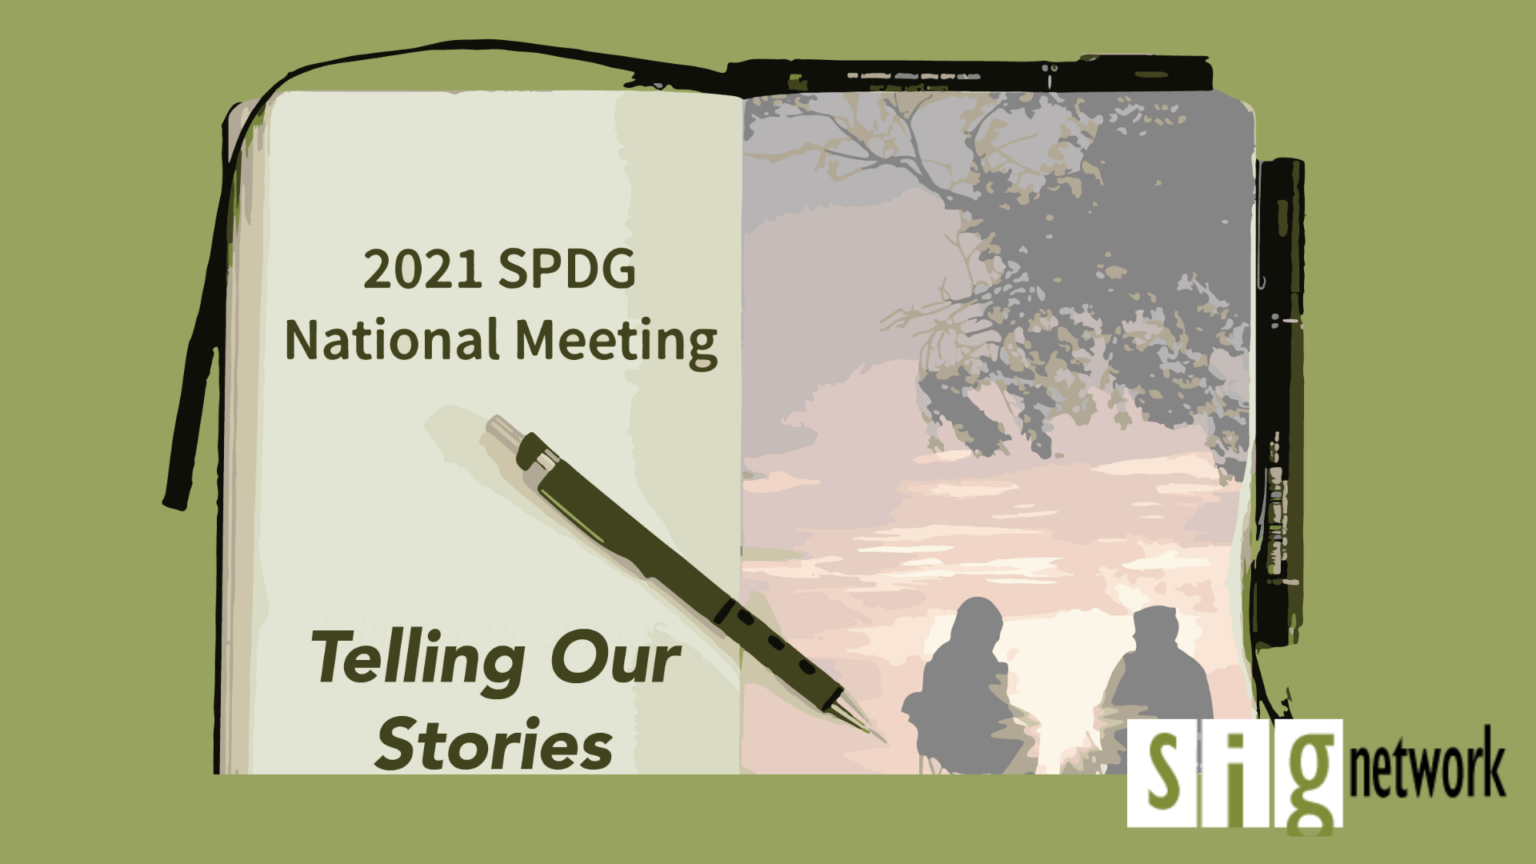 2021 SPDG National Meeting, Telling Our Stories, Signetwork